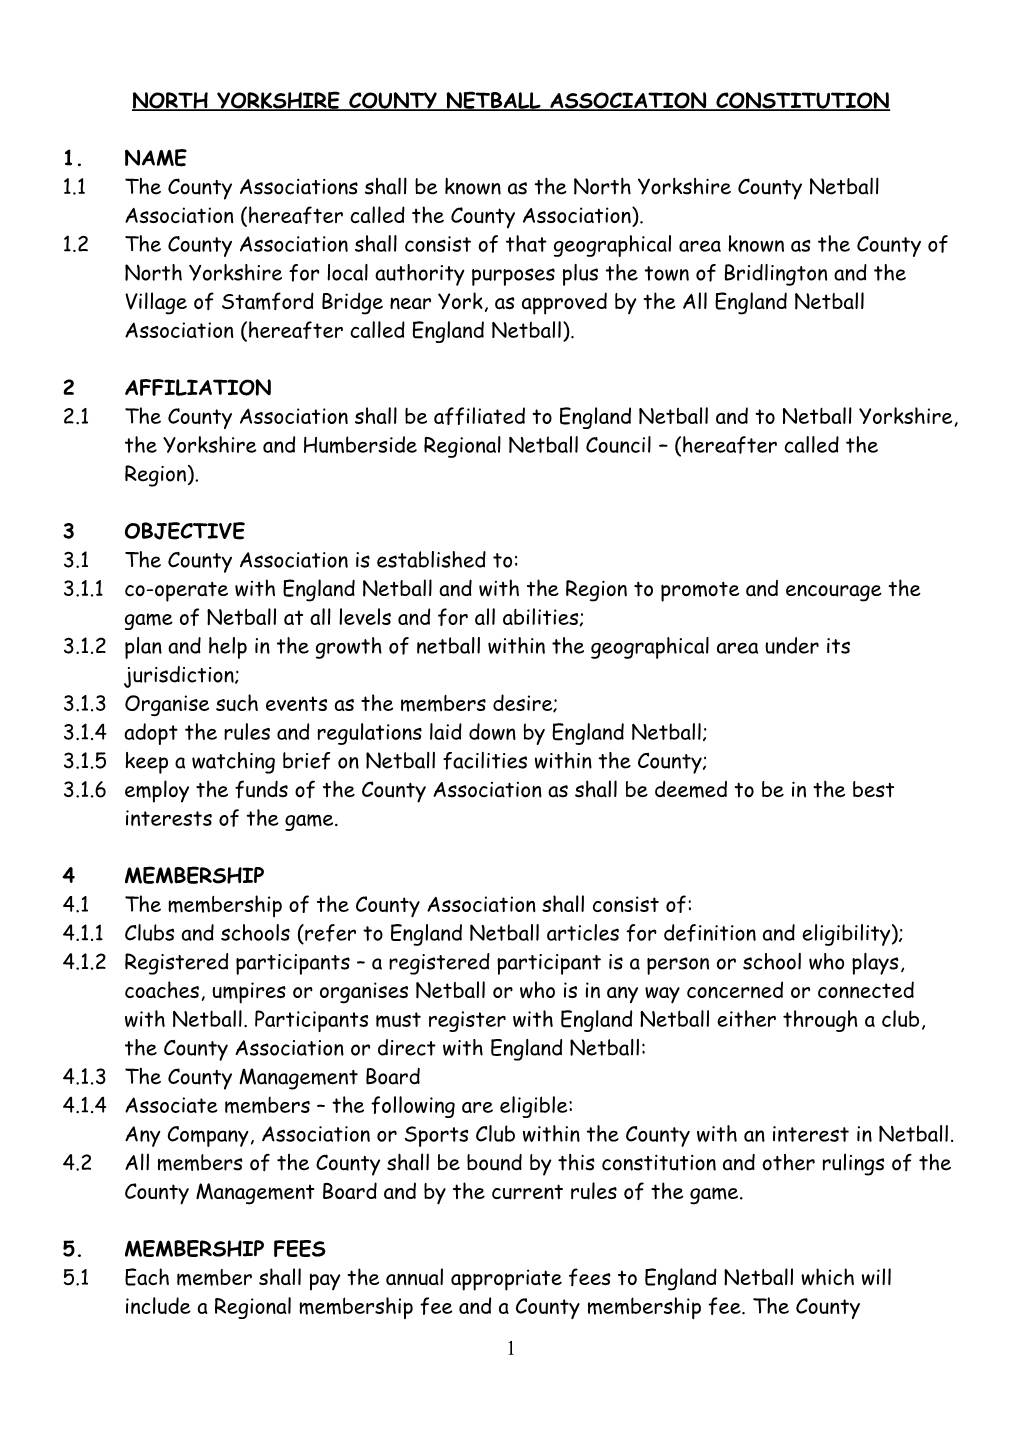 North Yorkshire County Netball Association Constitution